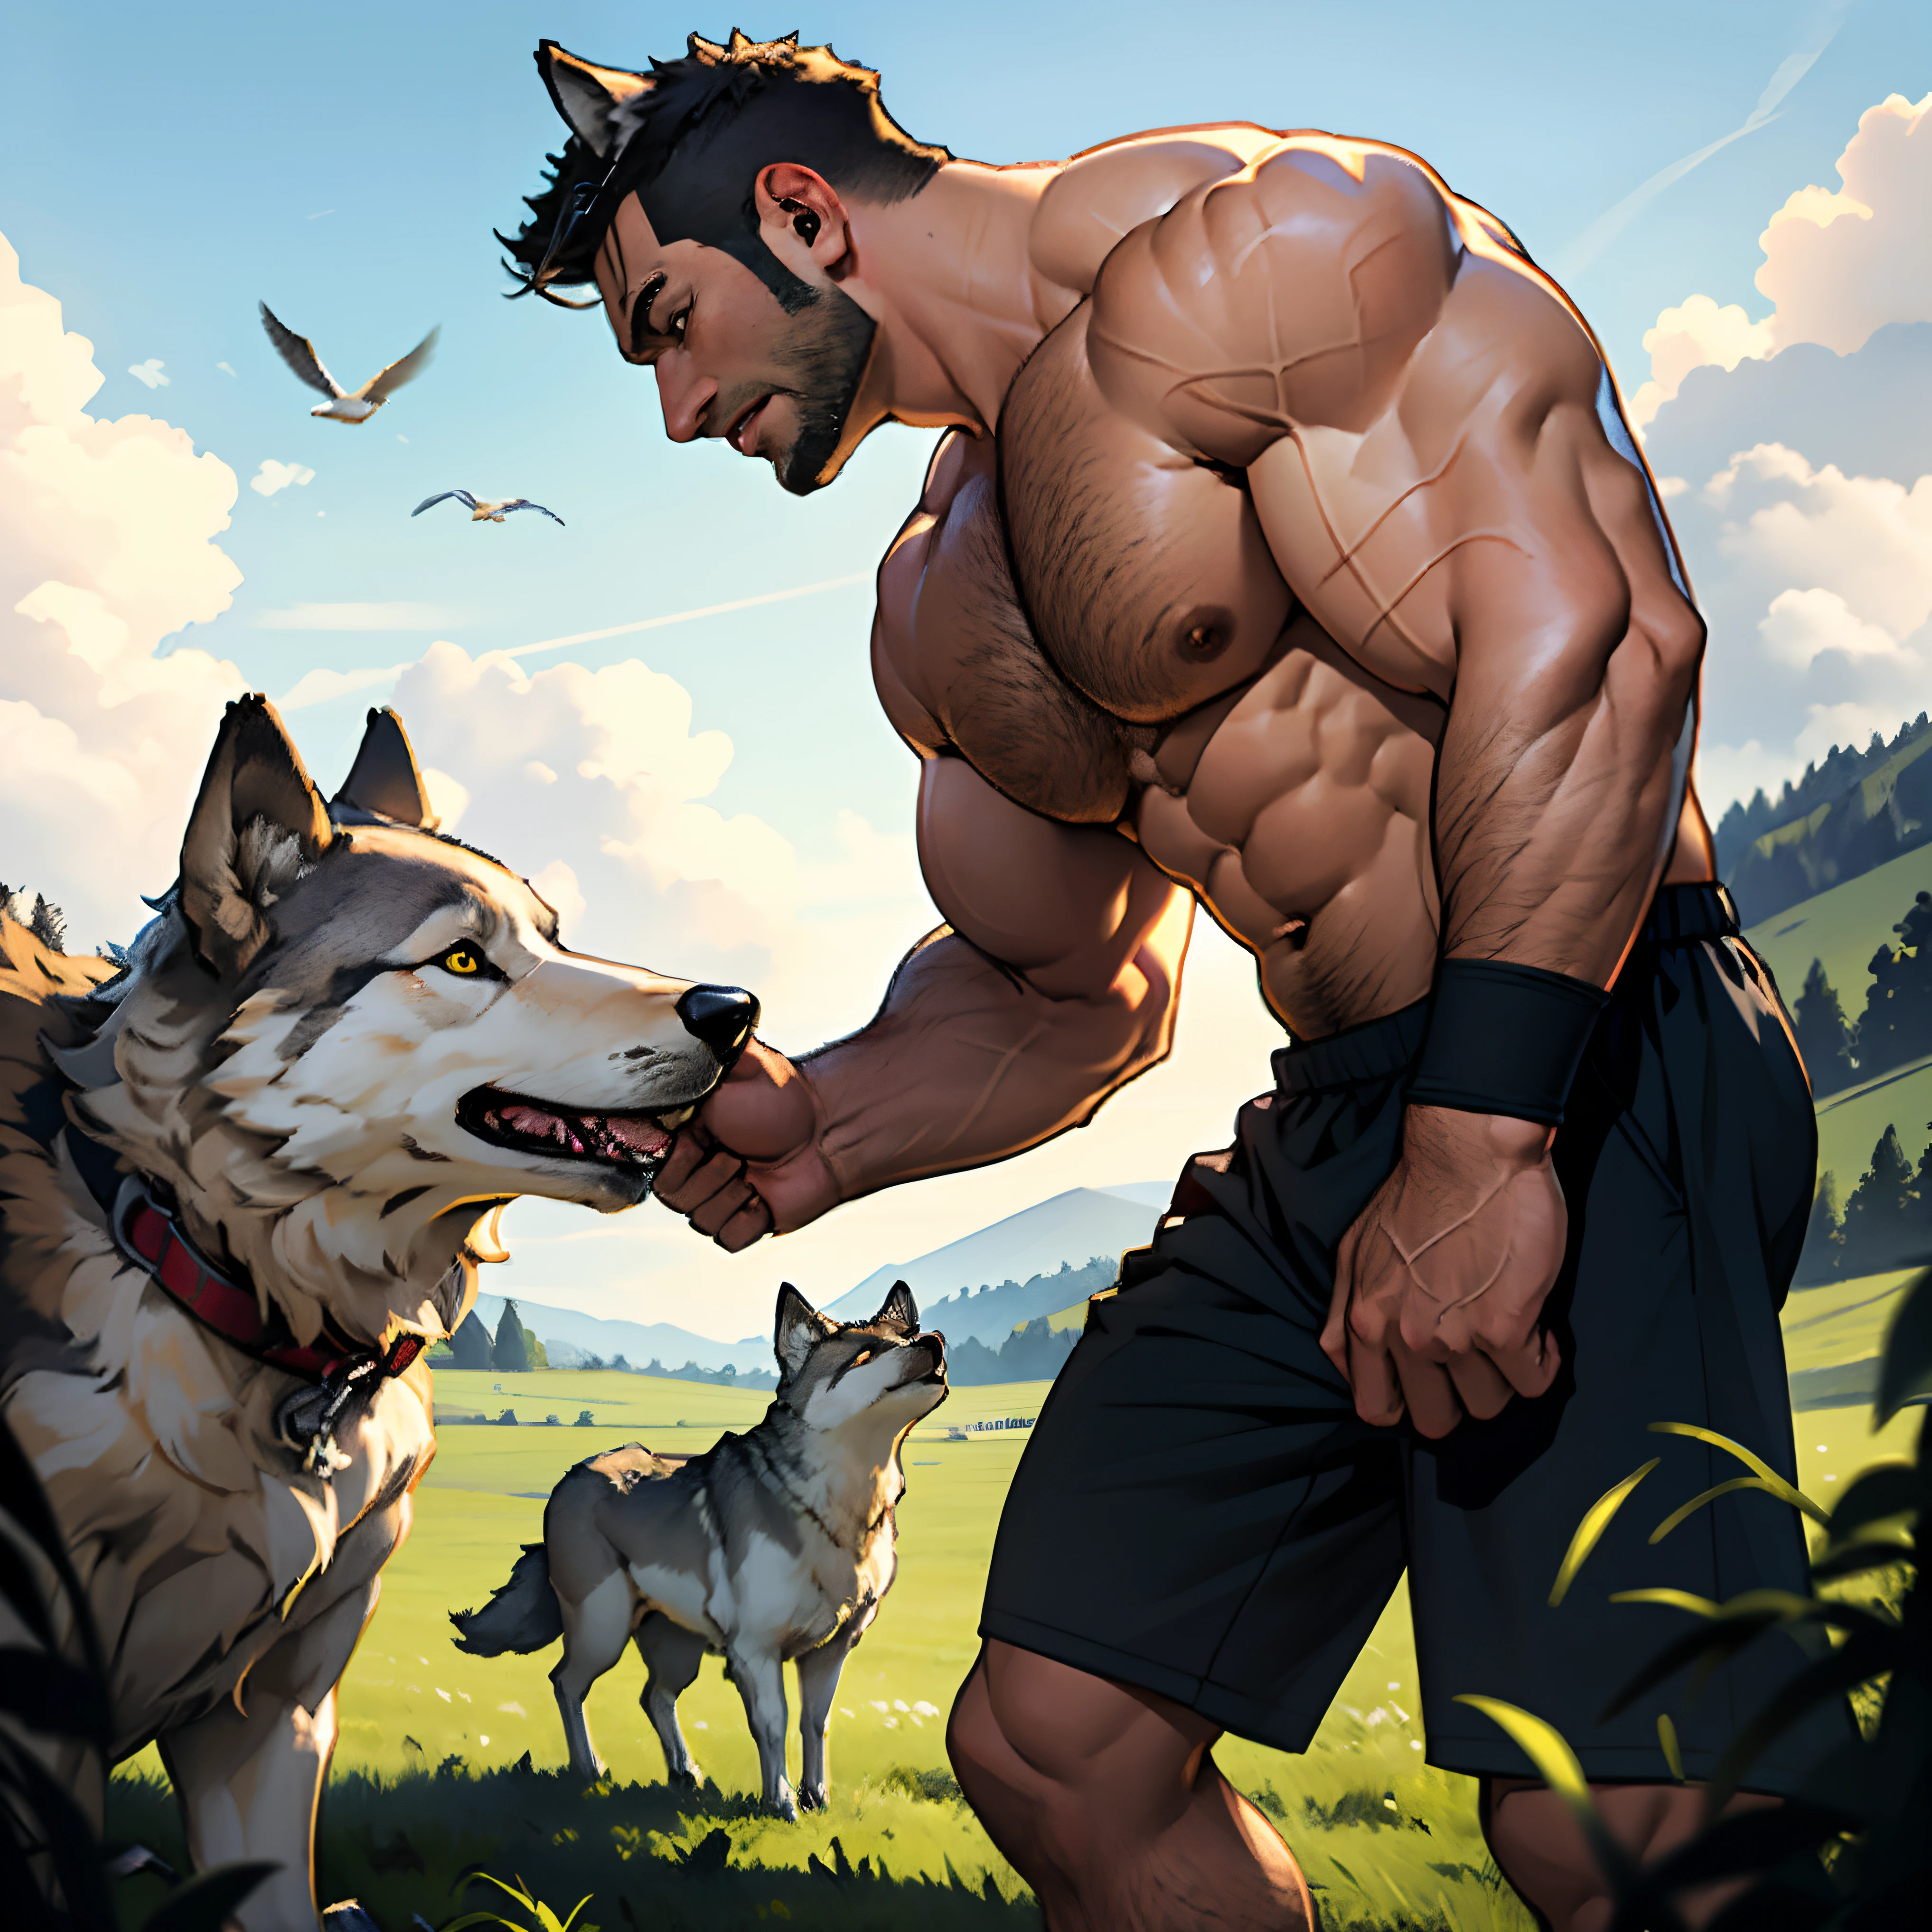 30 years old, The male, Fully naked, stubbles, Huge muscles, Mature man, Muscle swelling, Bodybuilding, chest muscles, Abs, Natural light, Wheat-colored skin, 1人, Wolverine, Naked, werecreature, Predators and prey, Hunting, Run an empty field, Side view, Wolves as pets, Men have wolf ears, Displays a side view of the entire body, The wolf cub is following the man, wide - angle shot, Best quality, Highly detailed, Chase sheep, Frightened sheep